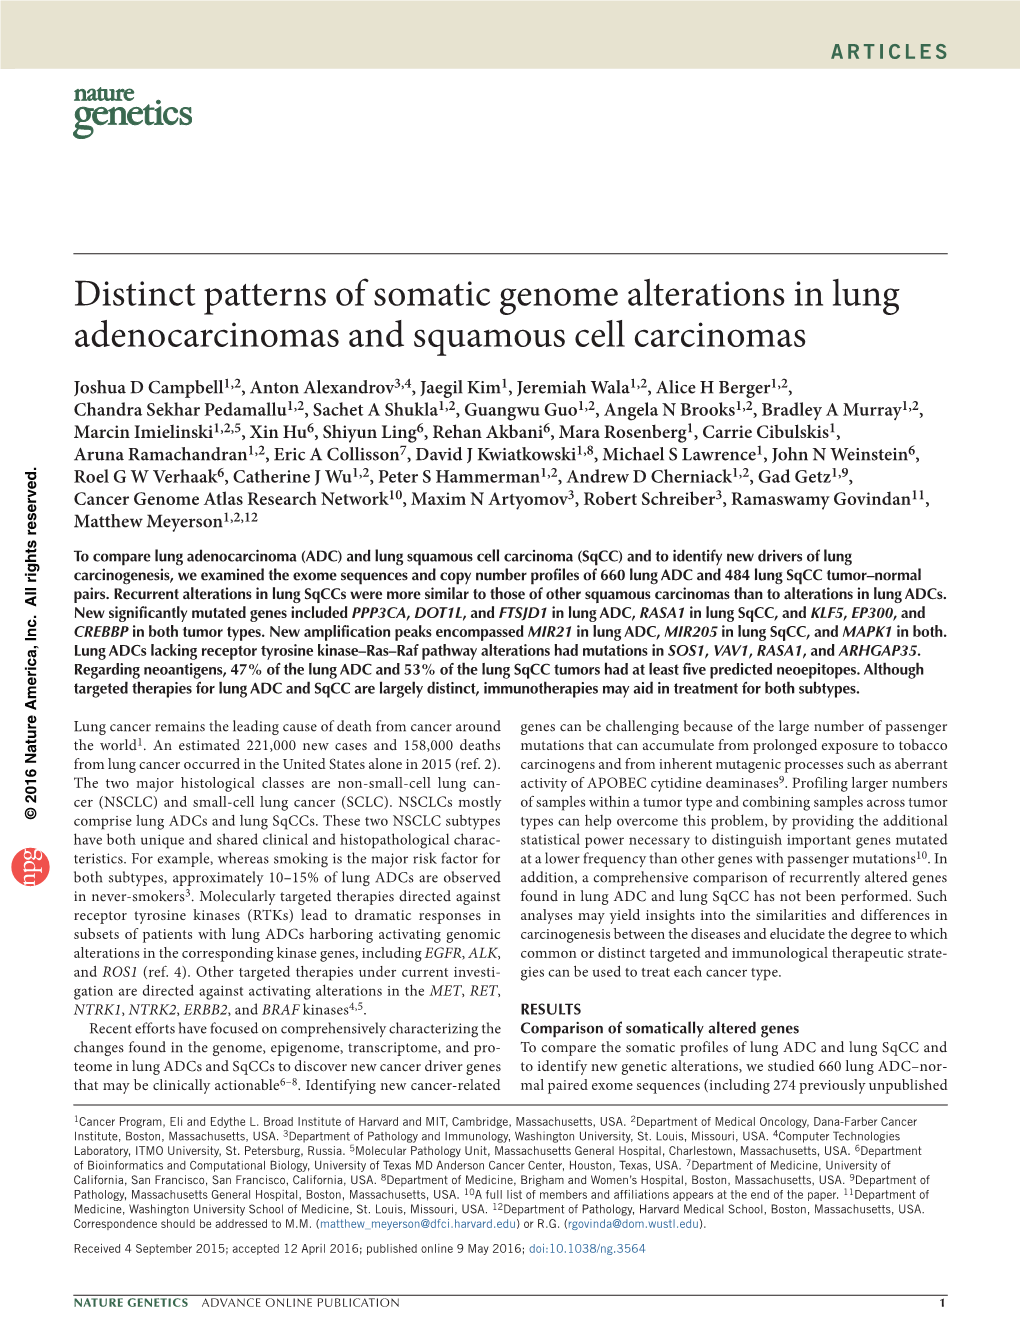 Distinct Patterns of Somatic Genome Alterations in Lung